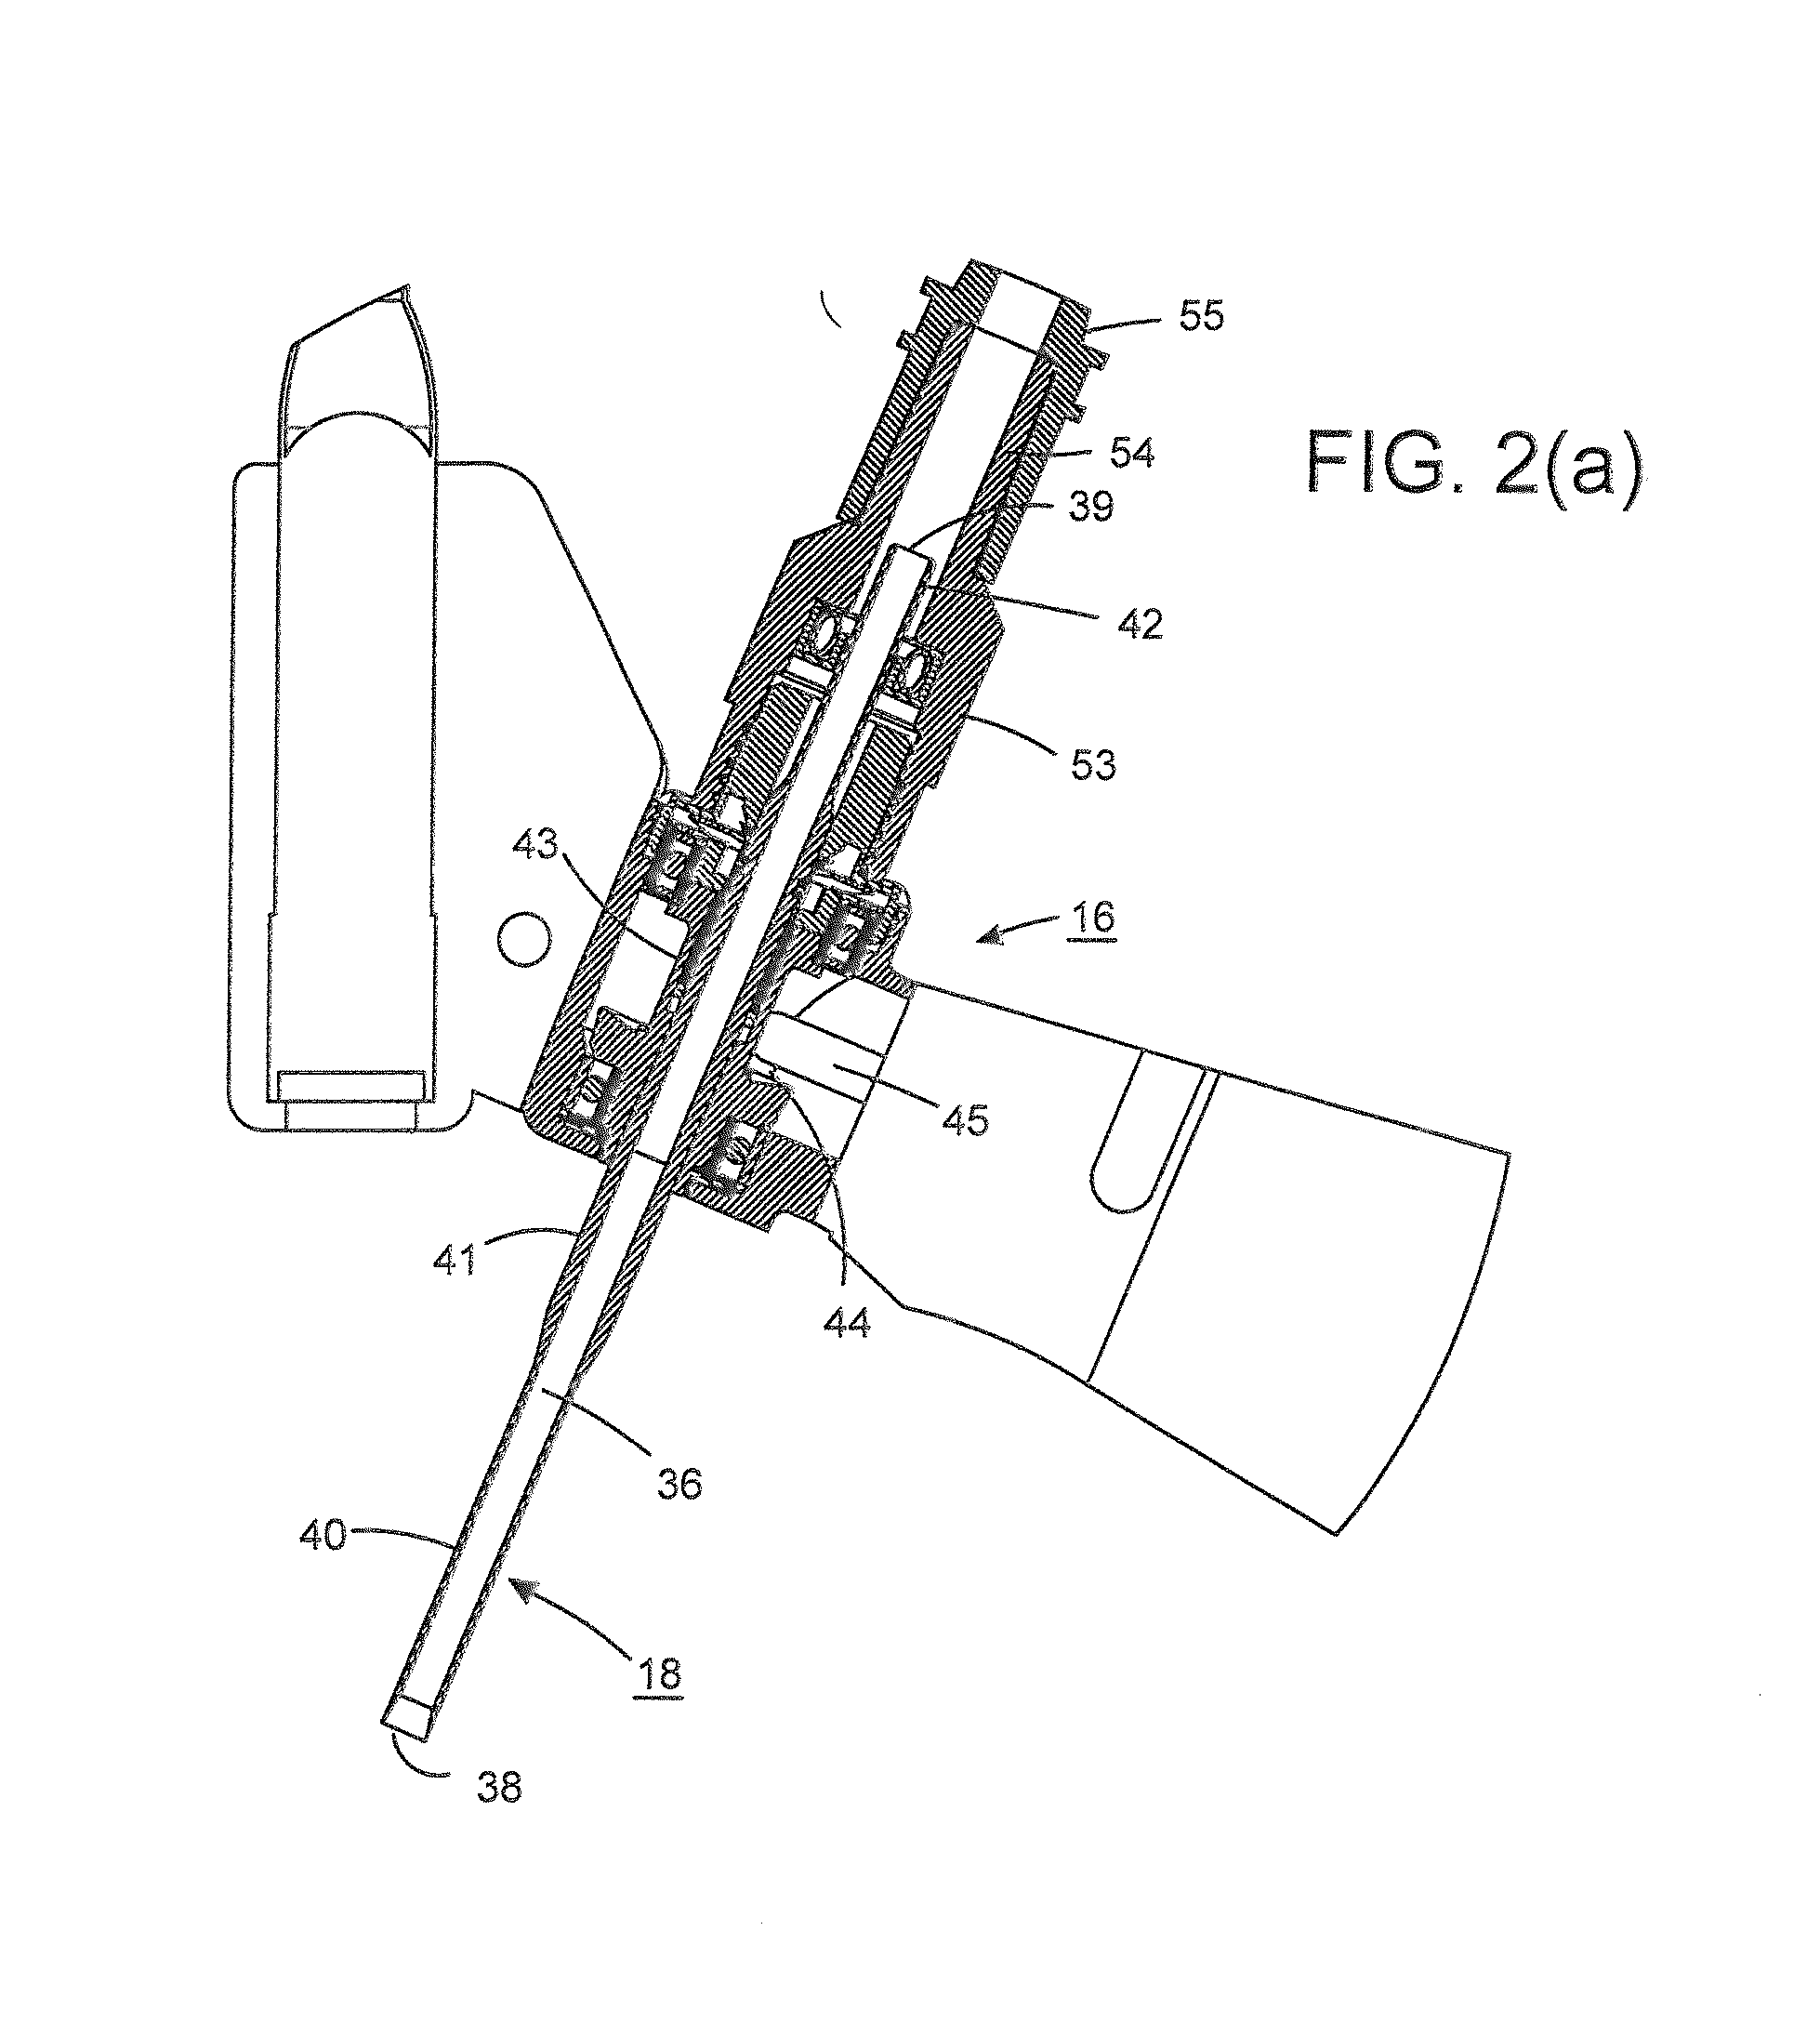 Apparatus for extracting hair follicles for use in transplantation